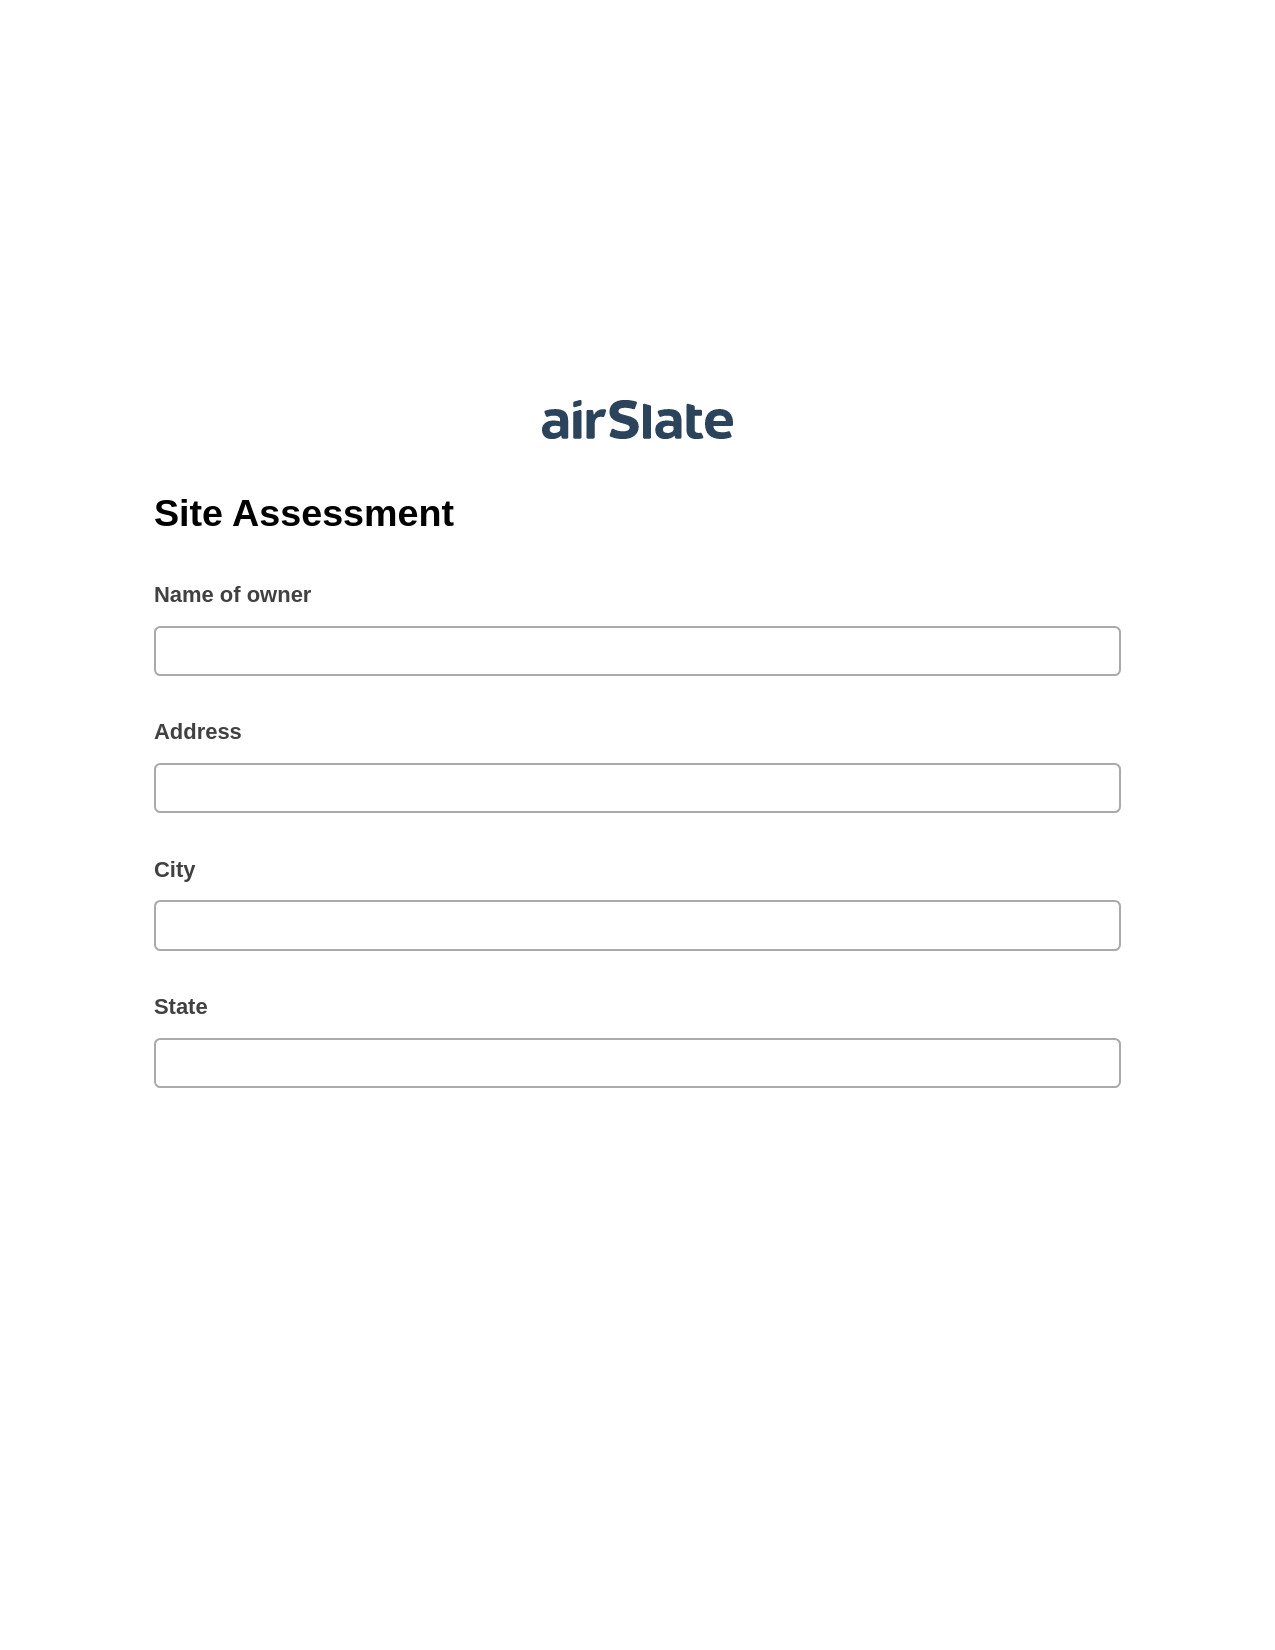 Site Assessment Pre-fill from Salesforce Record Bot, Pre-fill with Custom Data Bot, Post-finish Document Bot